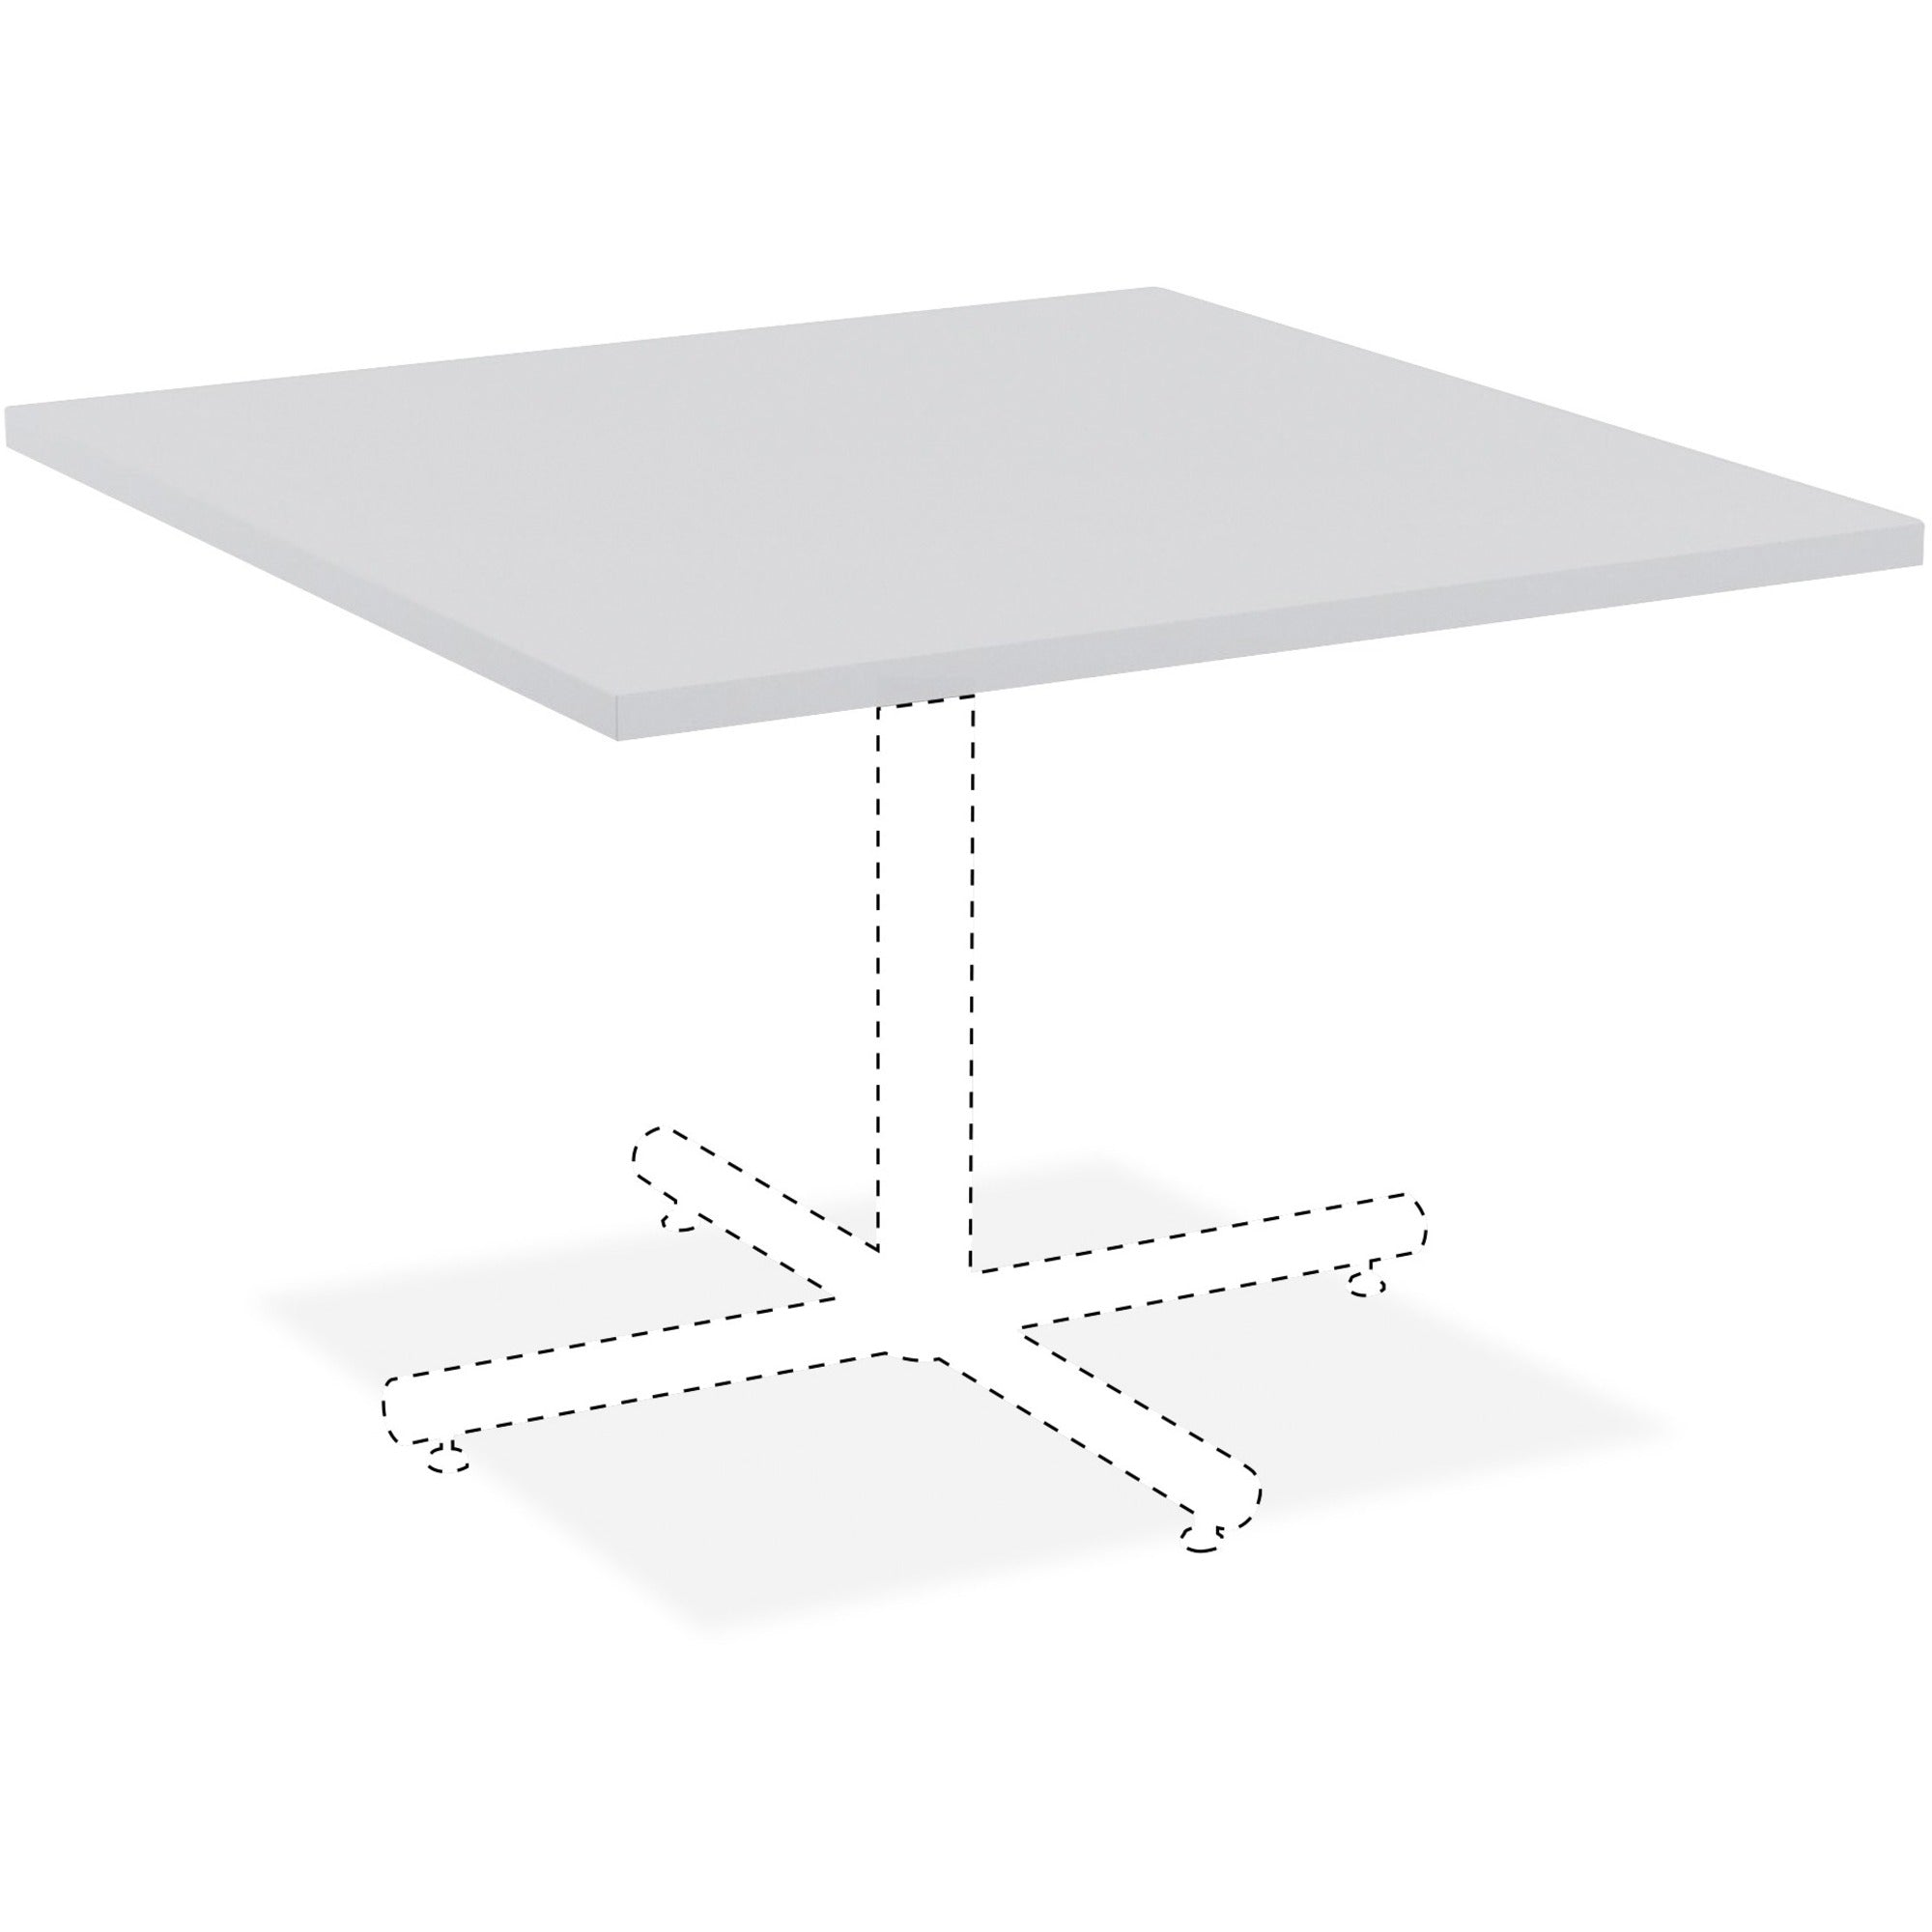 Lorell Hospitality Collection Tabletop - For - Table TopSquare Top - 36" Table Top Length x 36" Table Top Width x 1" Table Top Thickness - Assembly Required - High Pressure Laminate (HPL), Light Gray - 1 Each - 